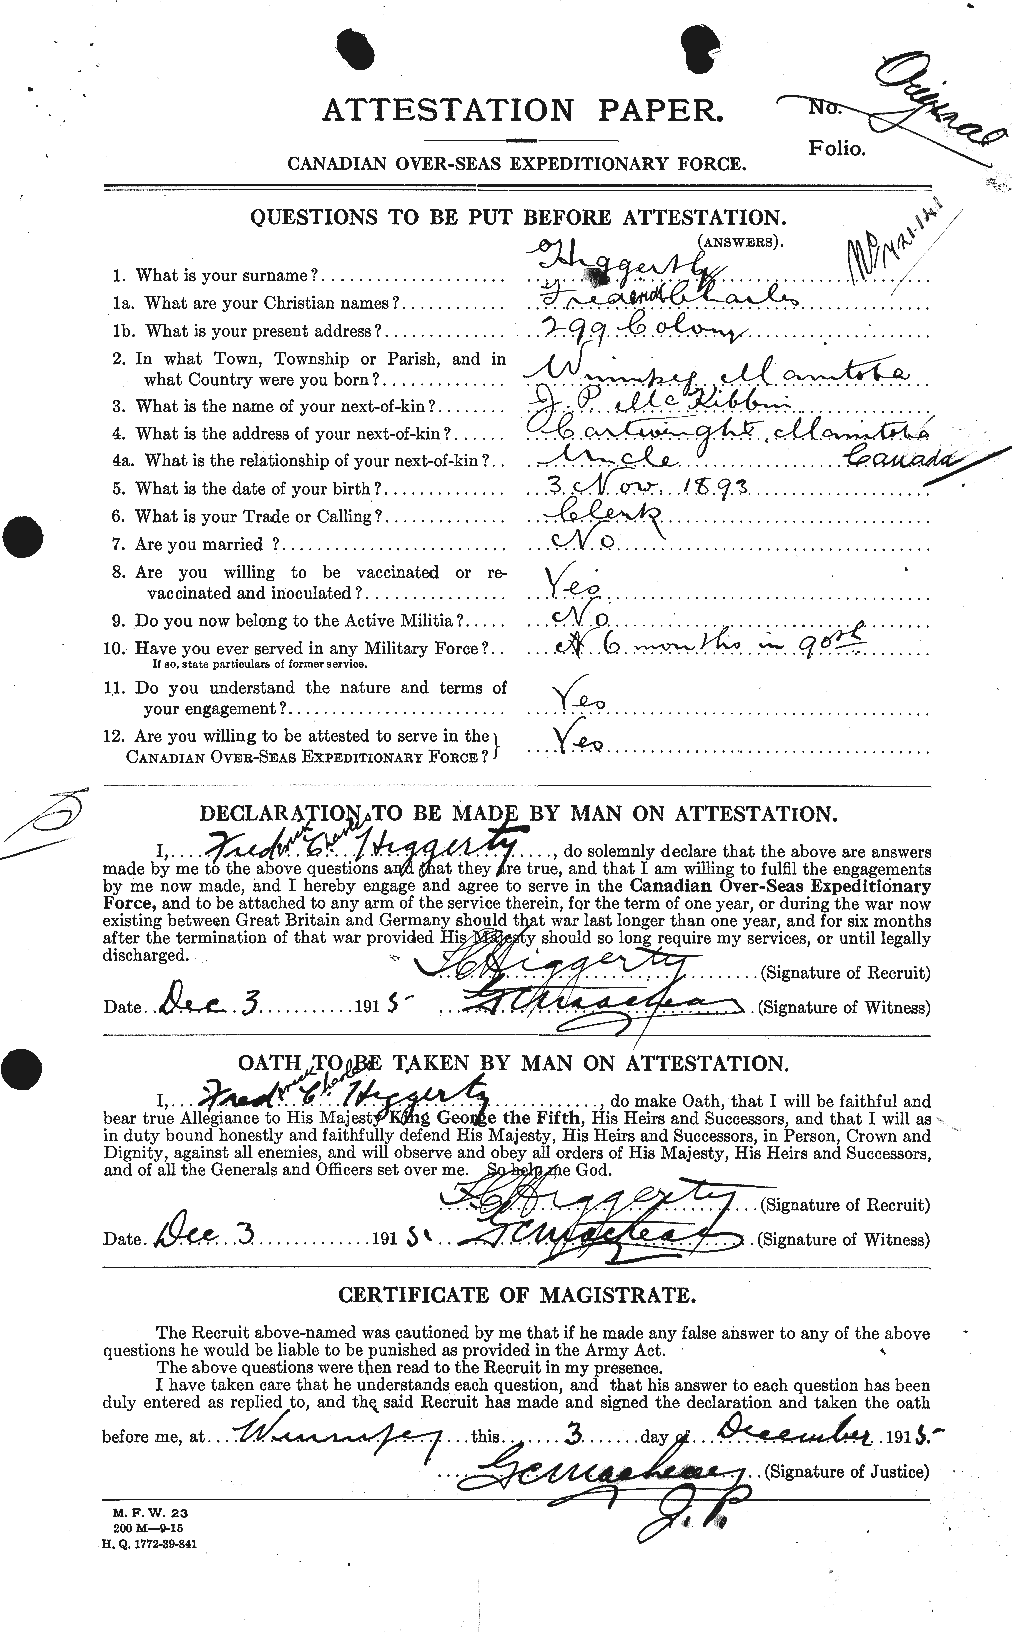 Personnel Records of the First World War - CEF 391780a